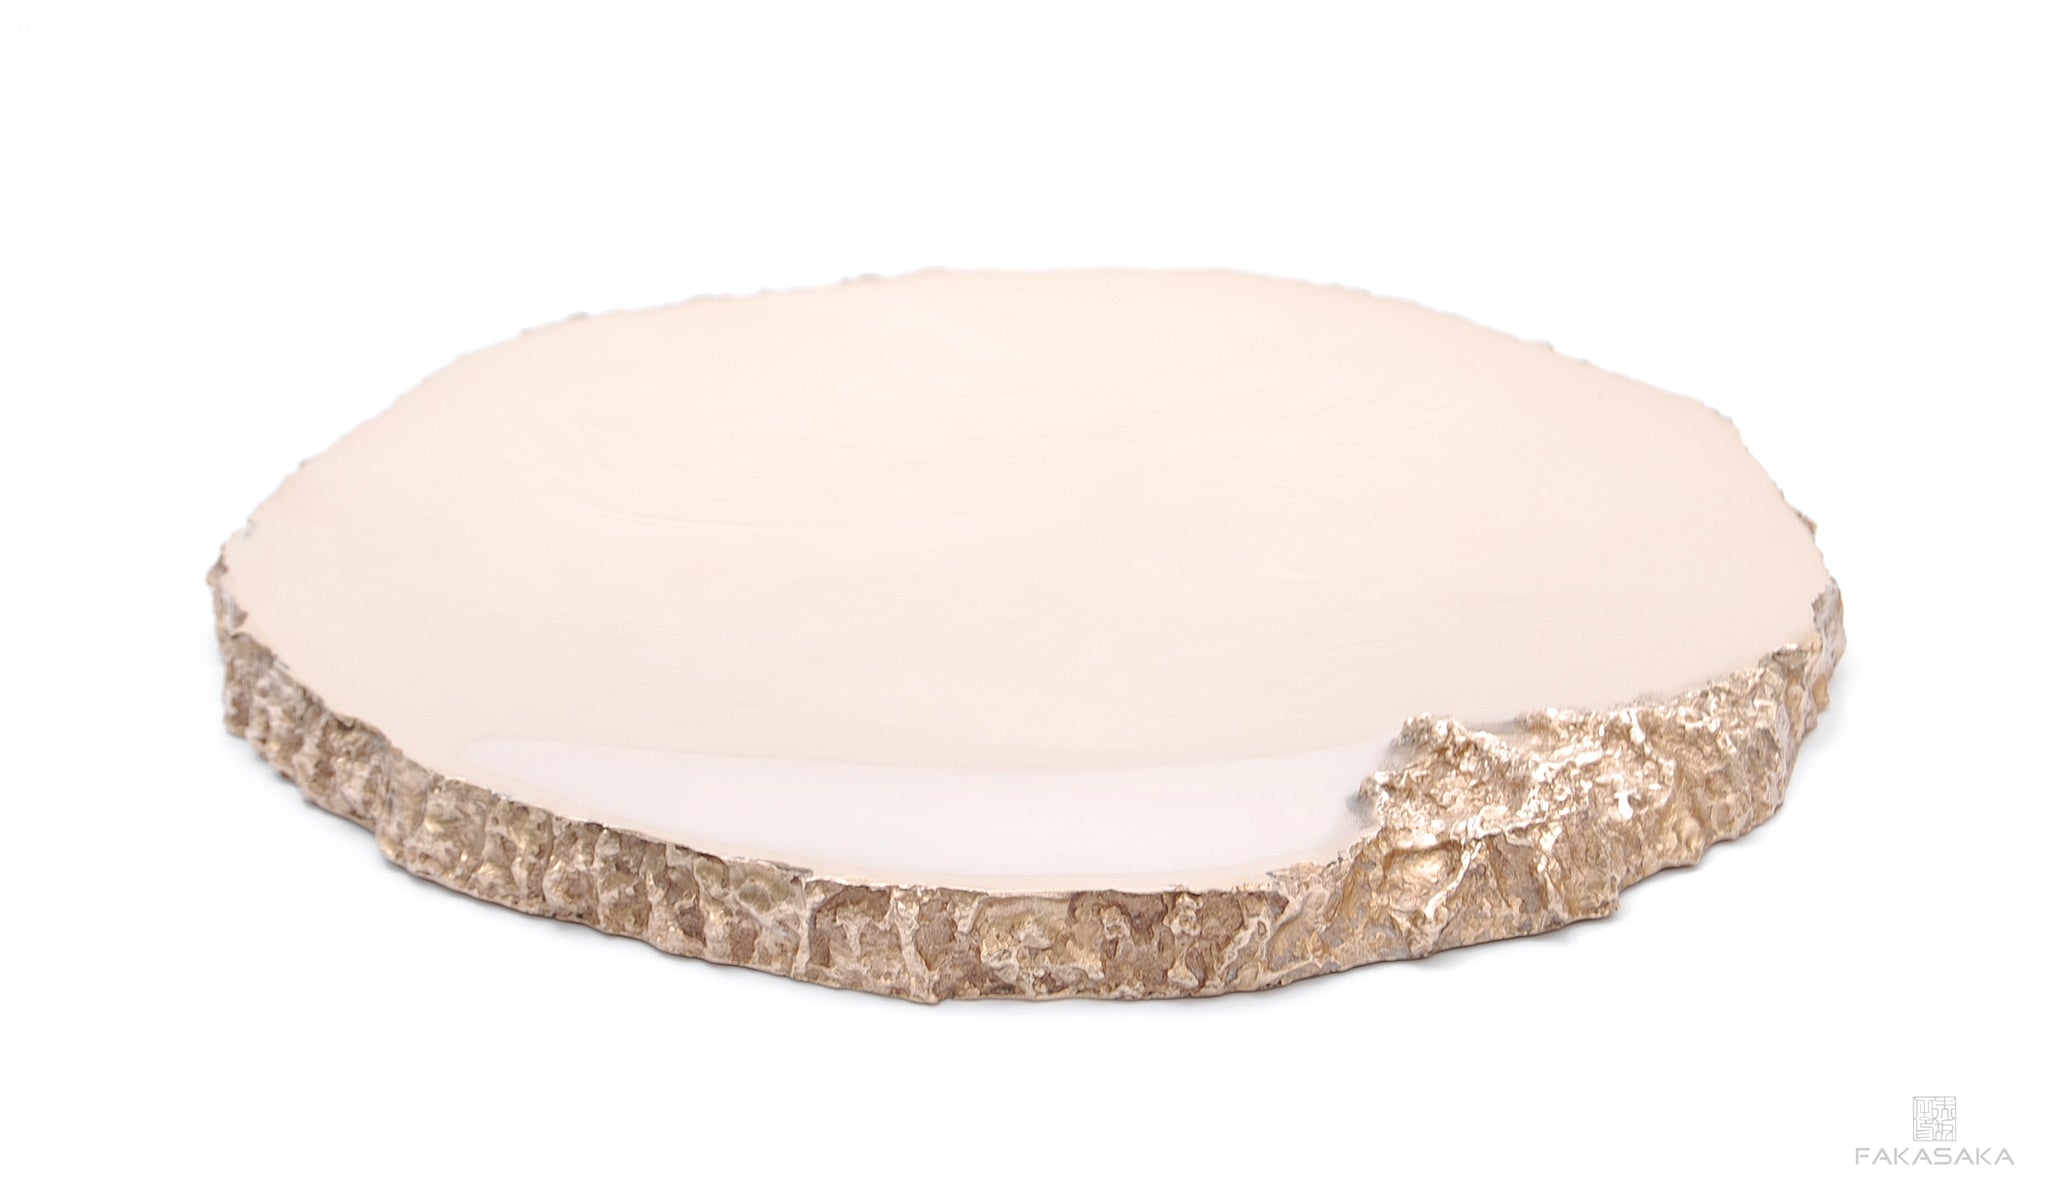 HOPE <br><br>ROUND TRAY / CENTERPIECE / CANDLE TRAY<br><br>POLISHED BRONZE